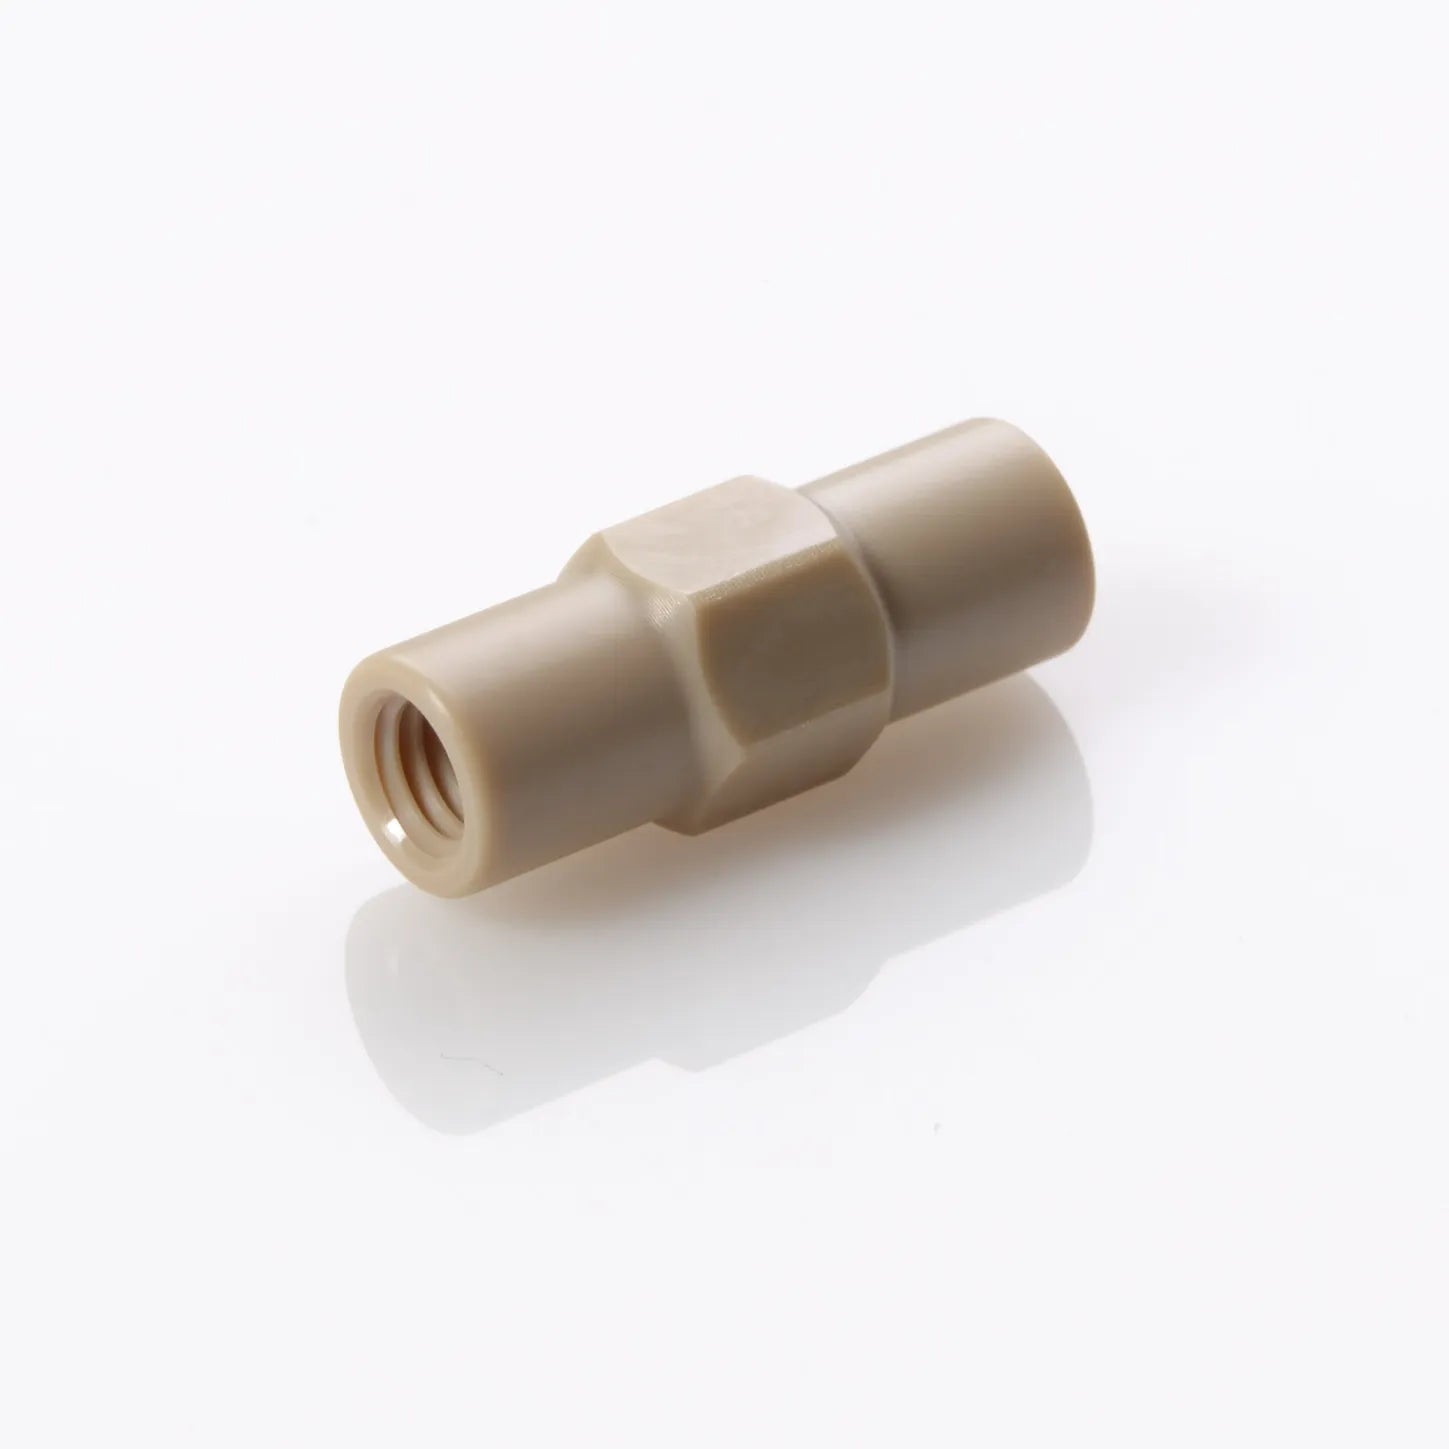 Connector Union PEEK™ 0.005" (0.25mm) Thru-Hole for 1/16" OD Tubing (Union Body Only)